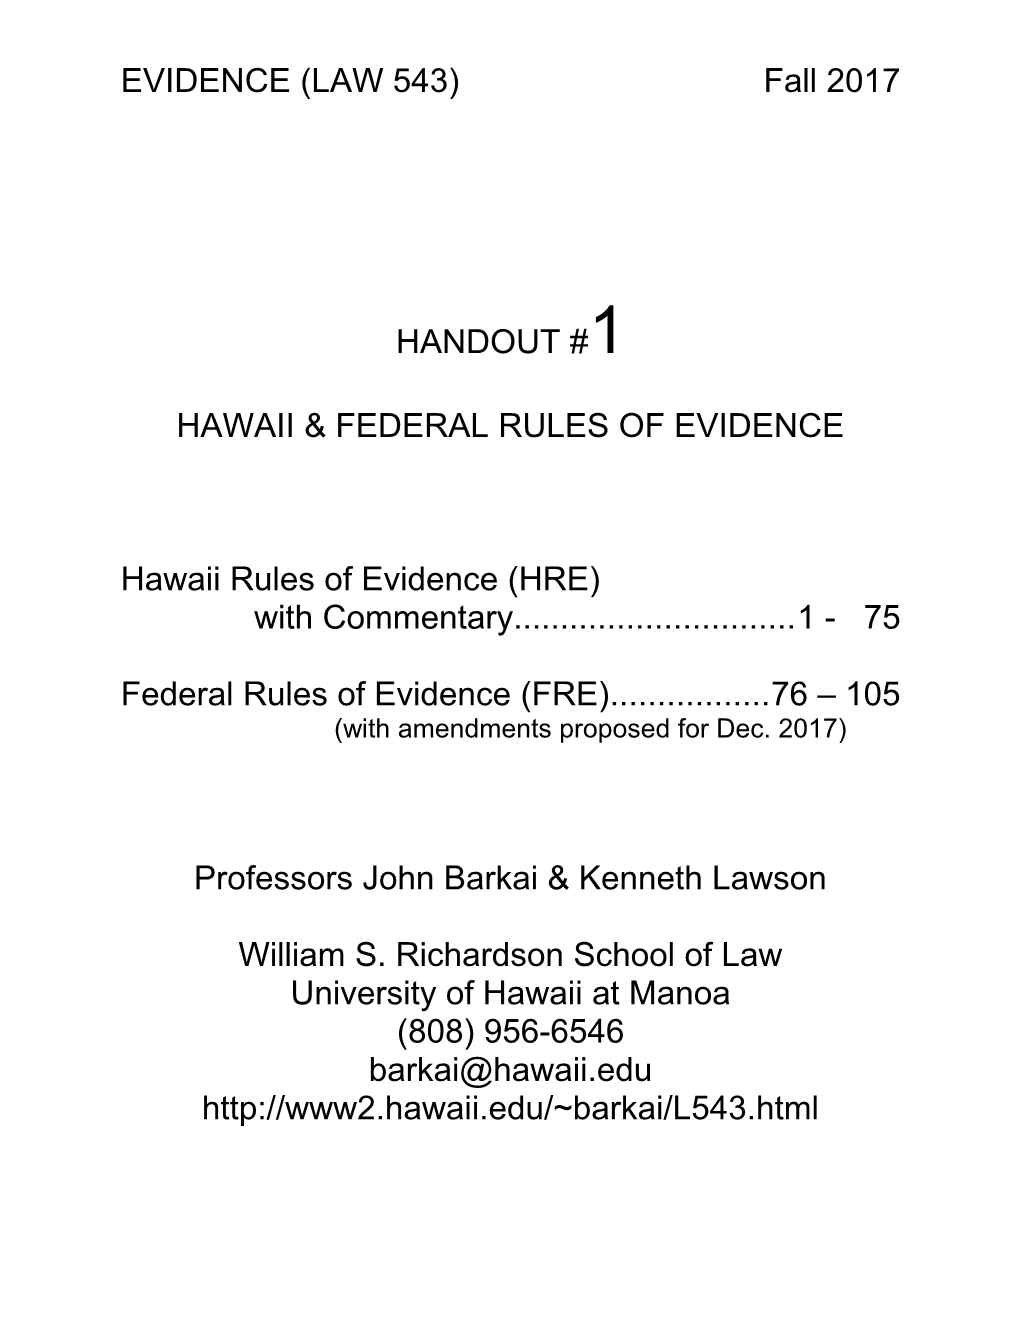 Hawaii & Federal Rules of Evidence